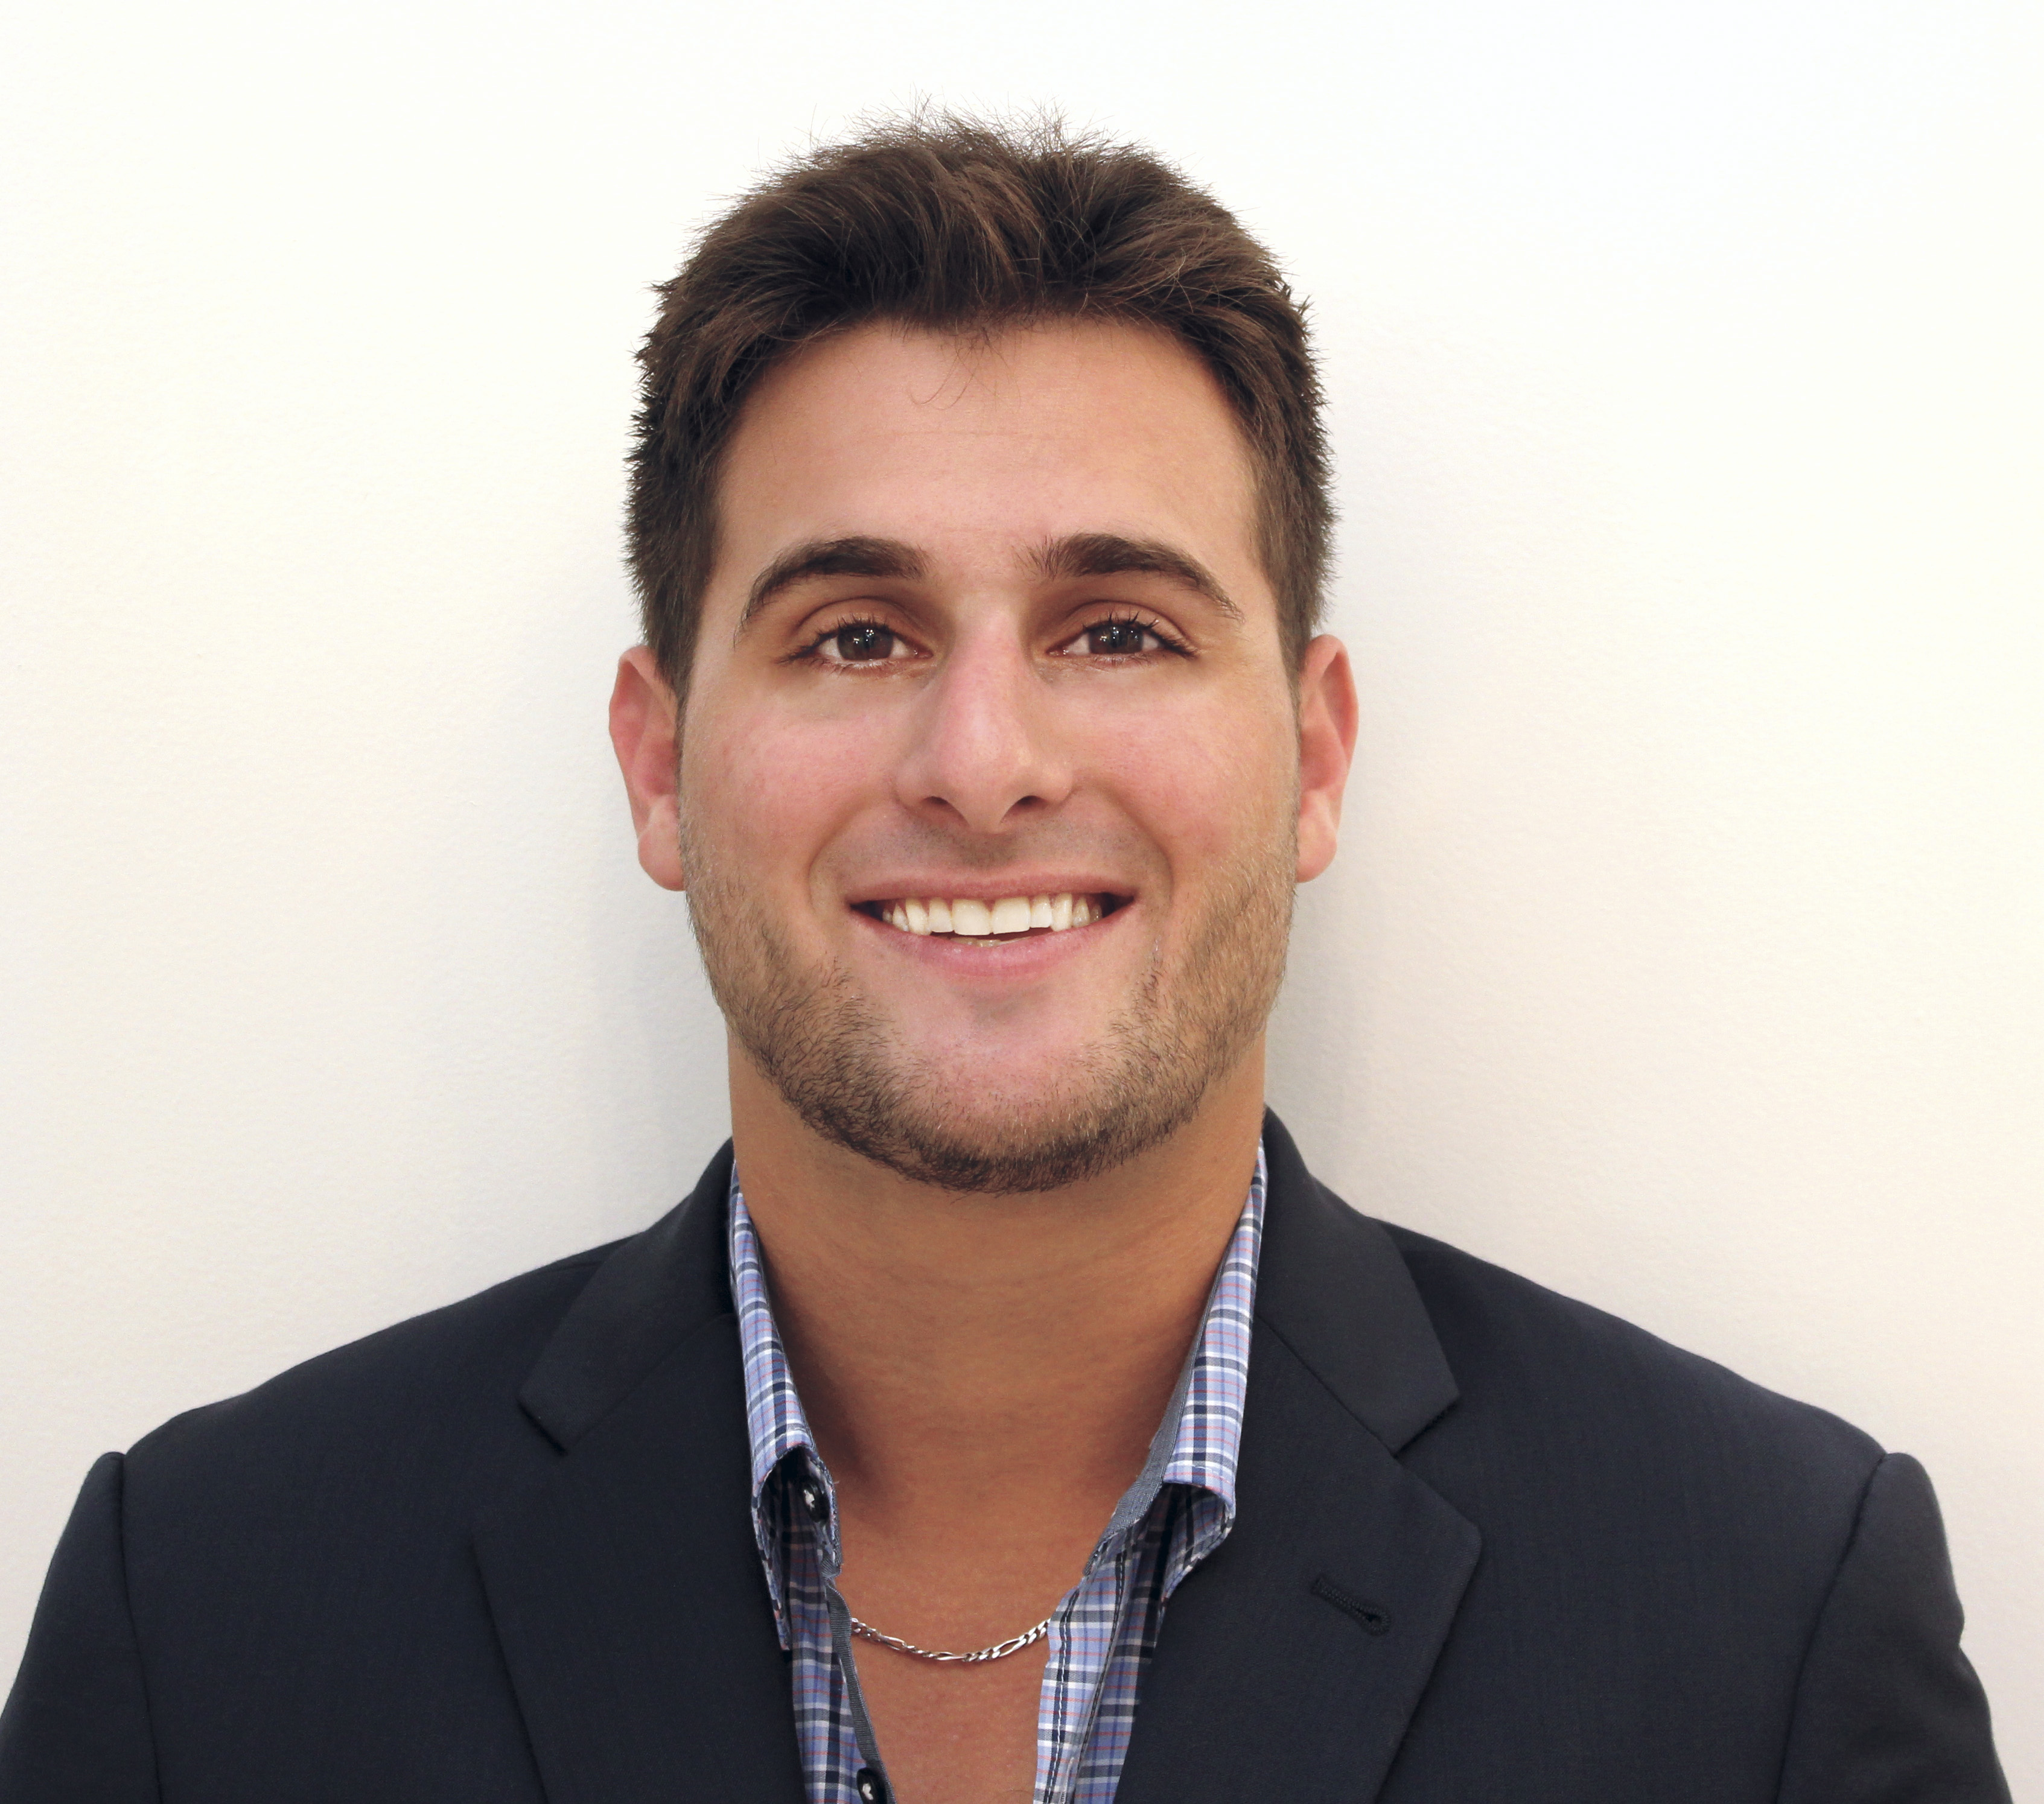 Element Funding has named AJ Pasquale as its newest Loan Originator on its expanding team in West Palm Beach, Fla.